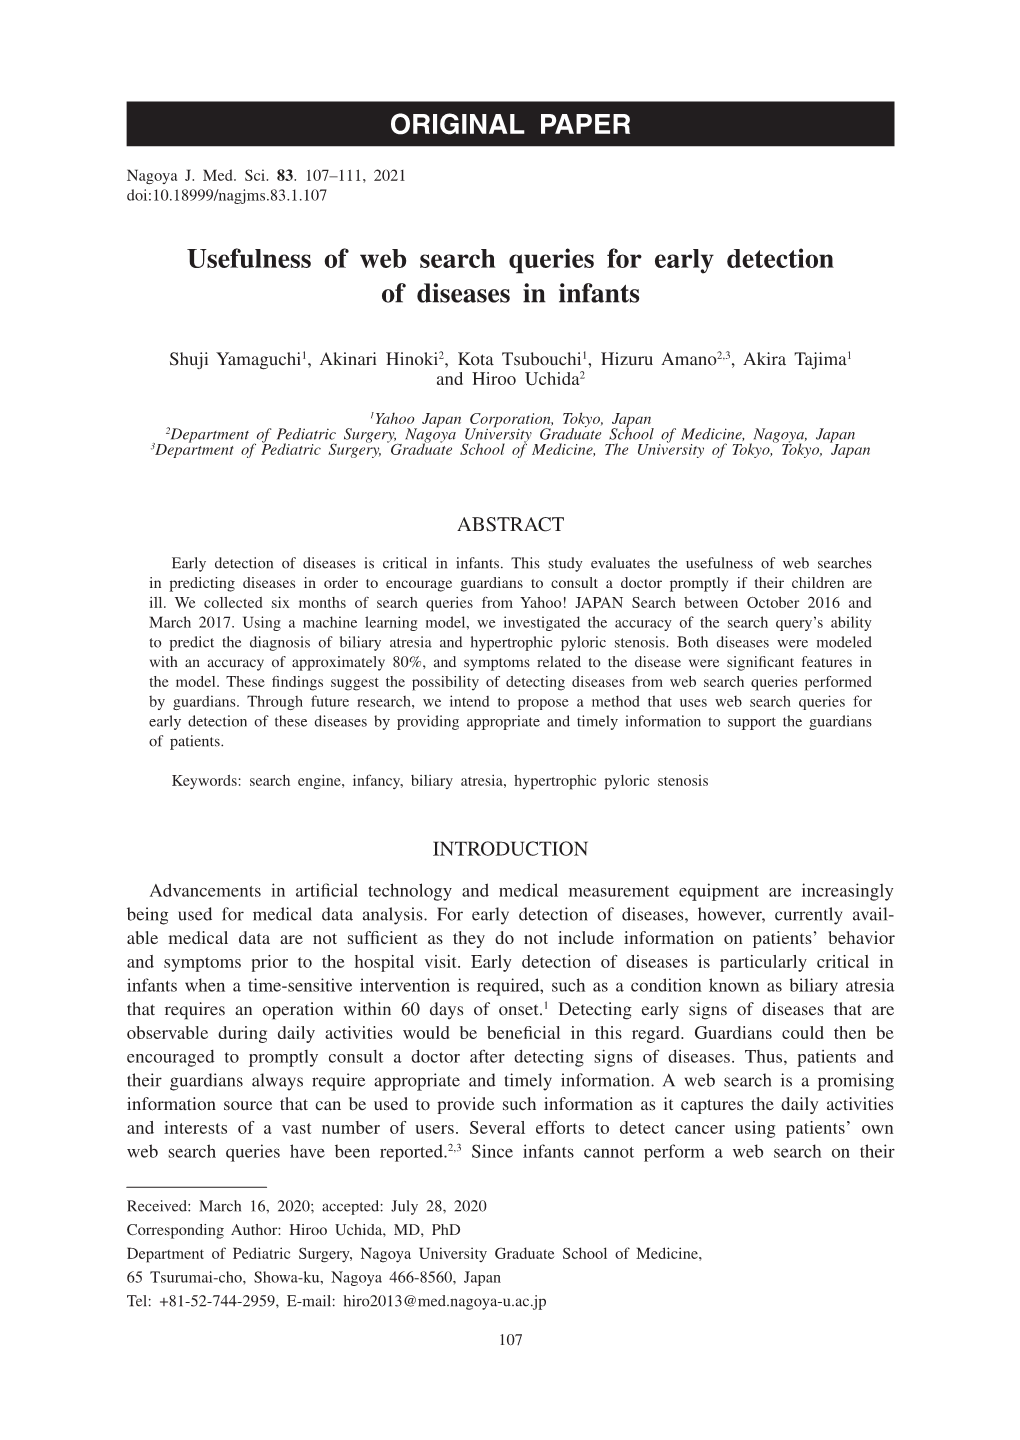 Usefulness of Web Search Queries for Early Detection of Diseases in Infants